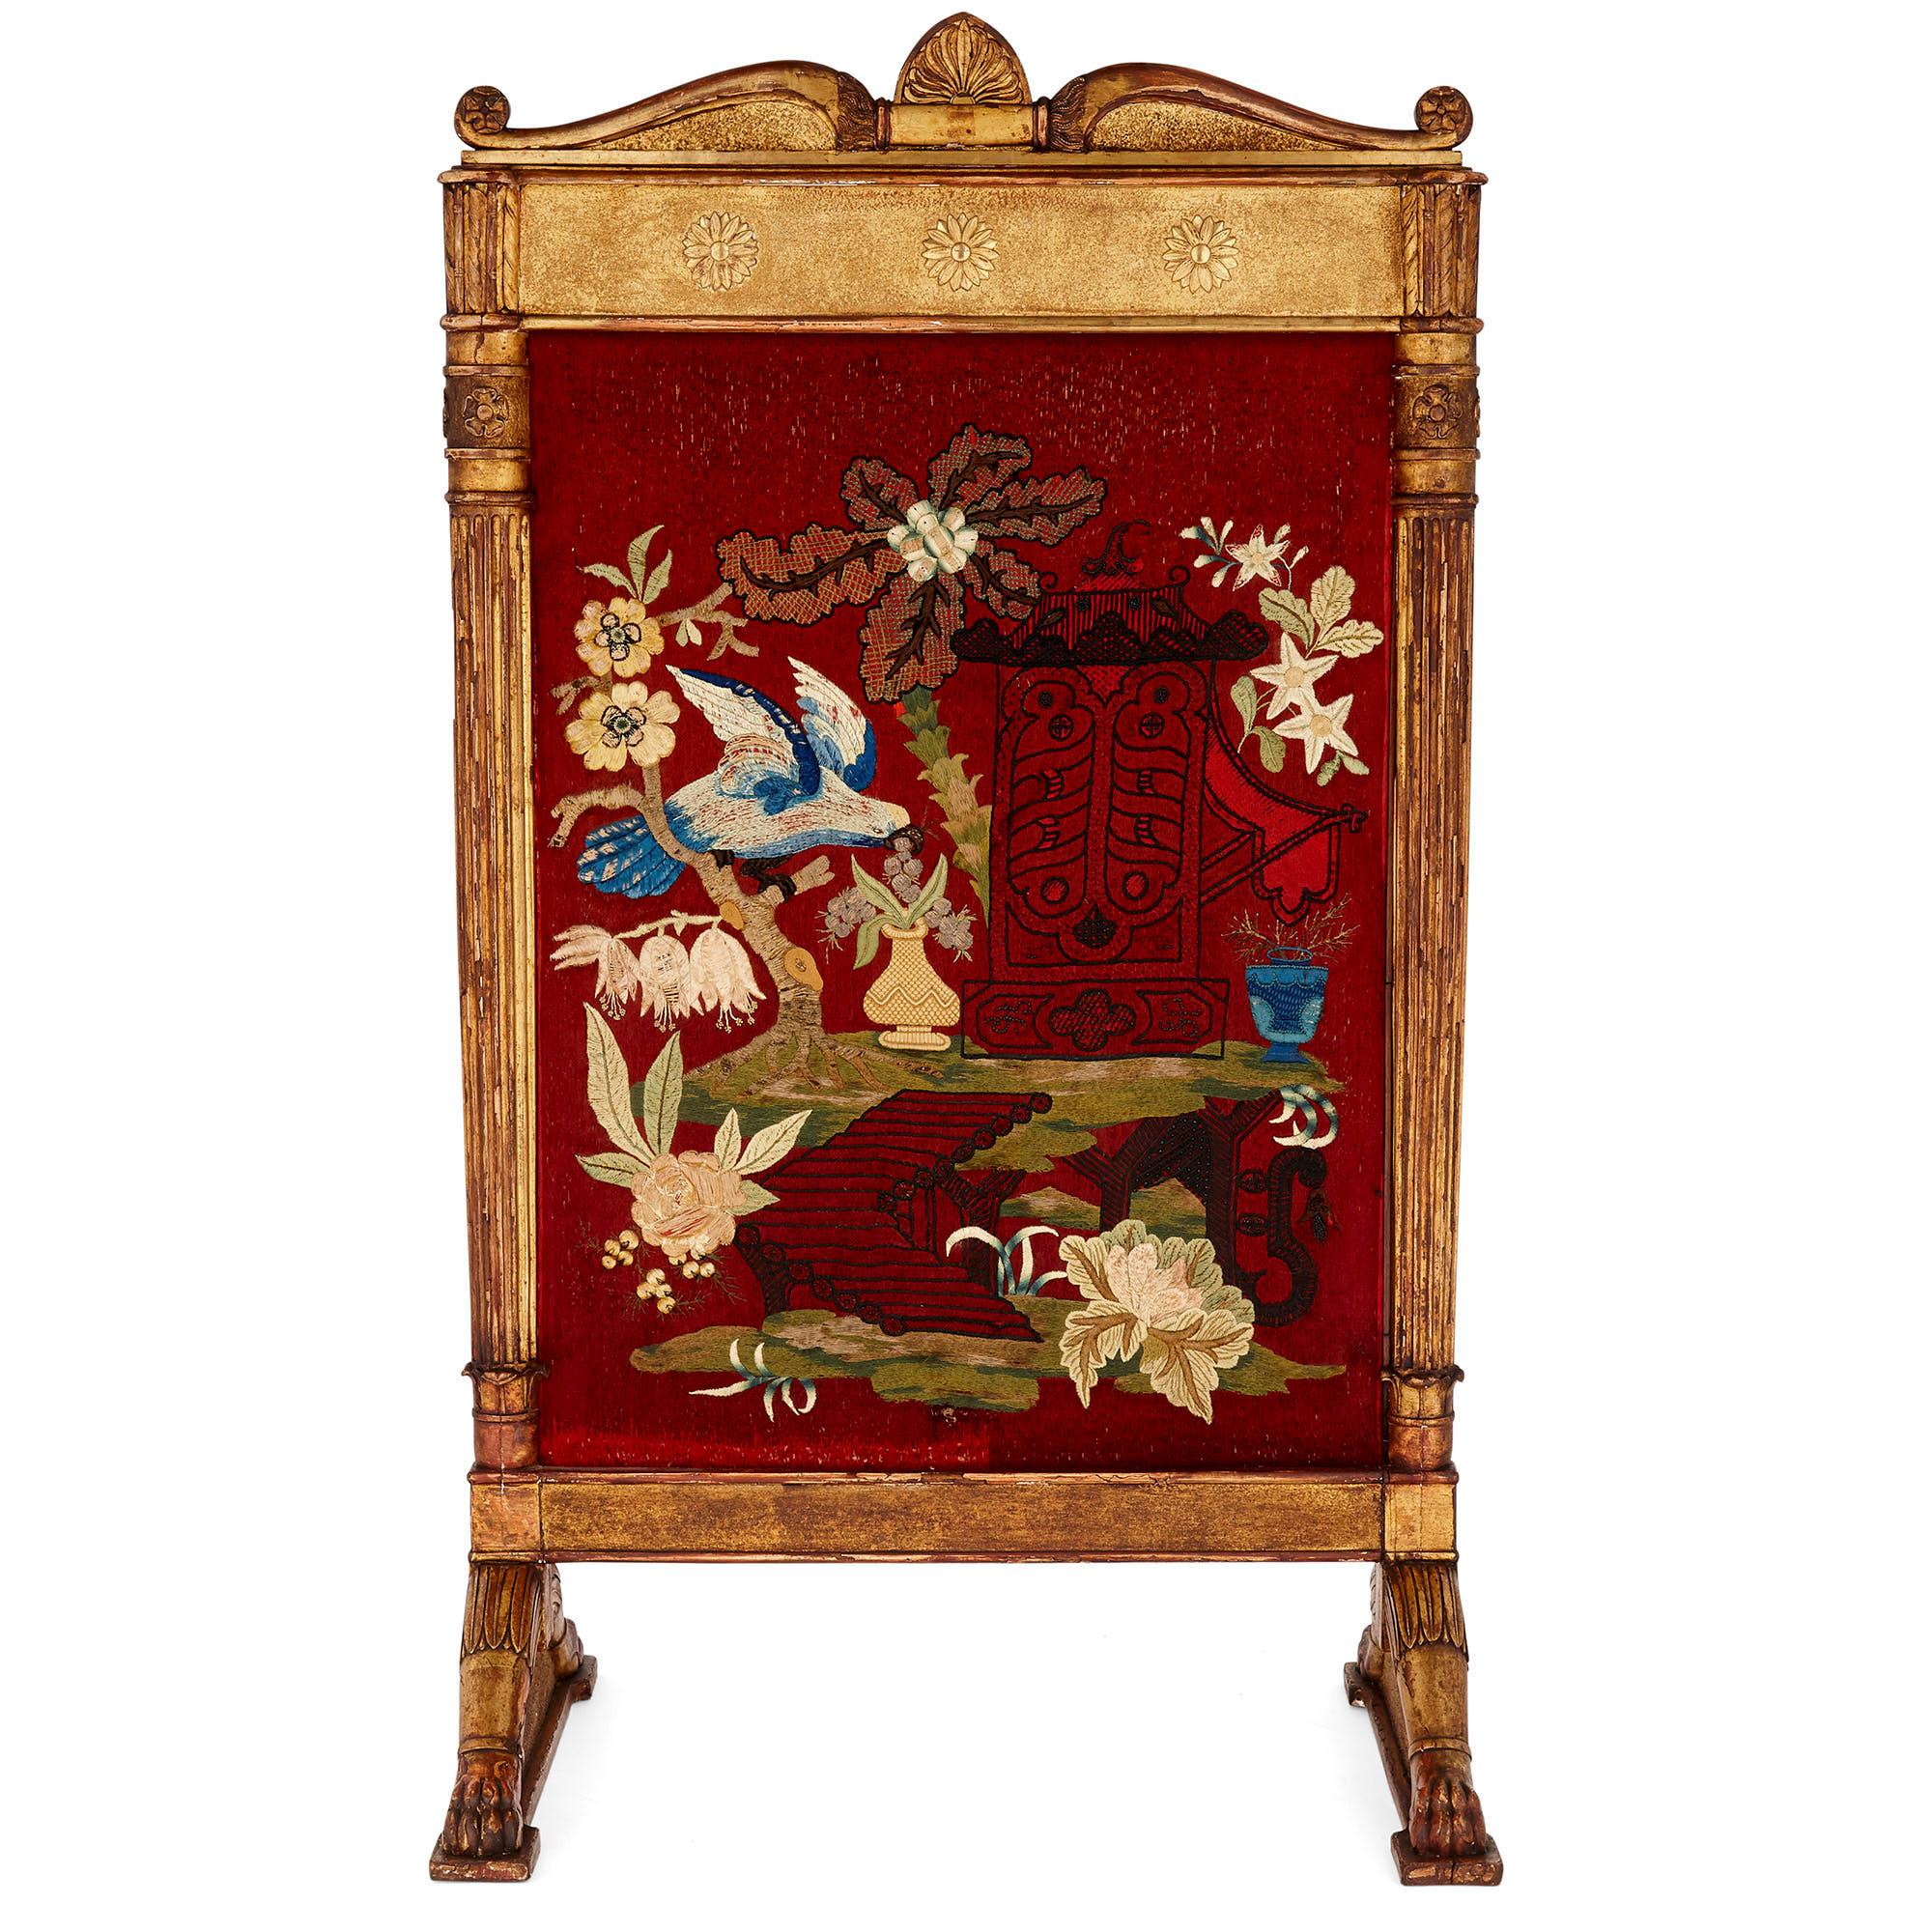 This firescreen features a beautifully embroidered central red-ground fabric panel, the embroidery portraying faintly Chinese-style motifs. The embroidered panel is held within a giltwood frame, the design of which is distinctly neoclassical—the